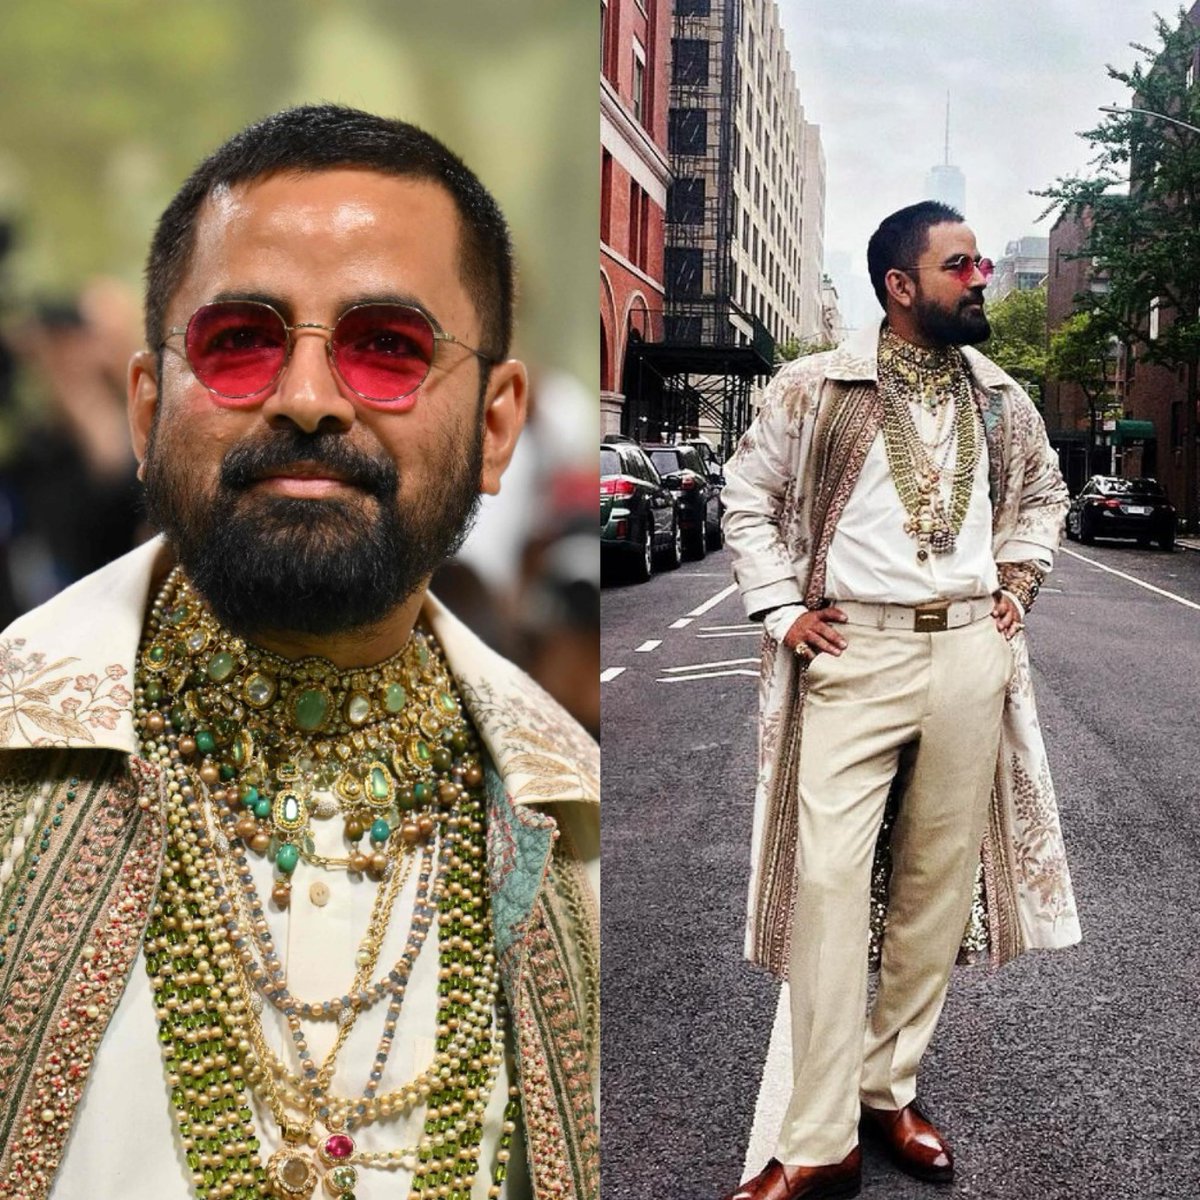 #SabyasachiMukherjee creates history by becoming the first Indian fashion designer to walk the #MetGala carpet! #MetGala2024 #India #FashionDesigner #SabyasachiMukherjee